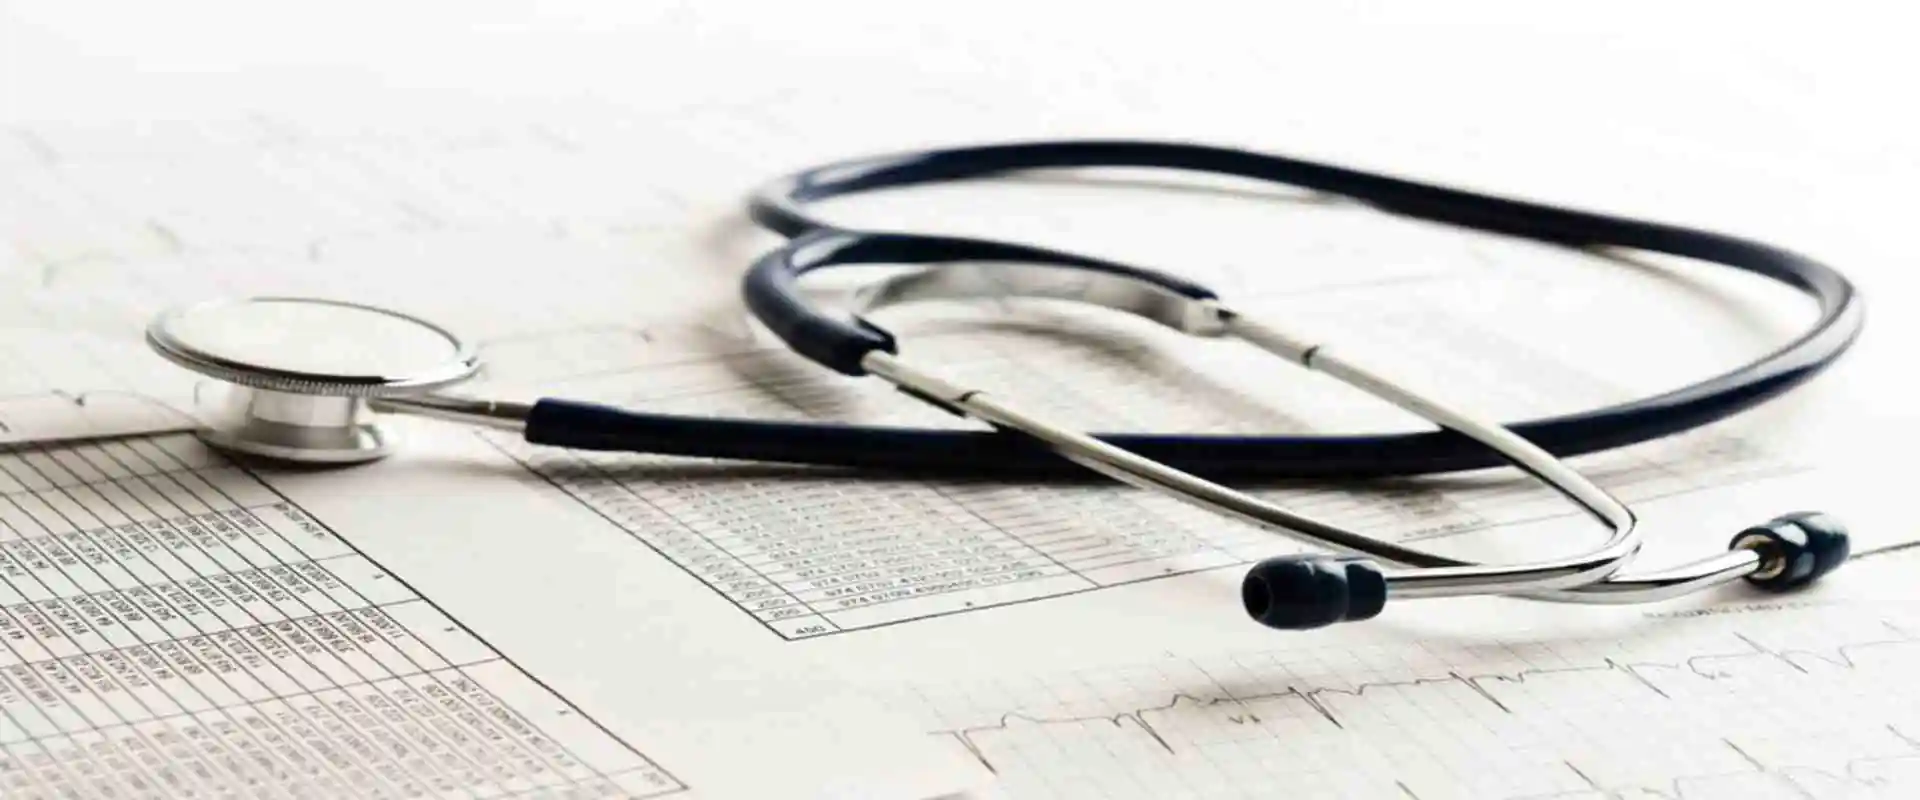 healthcare business intelligence